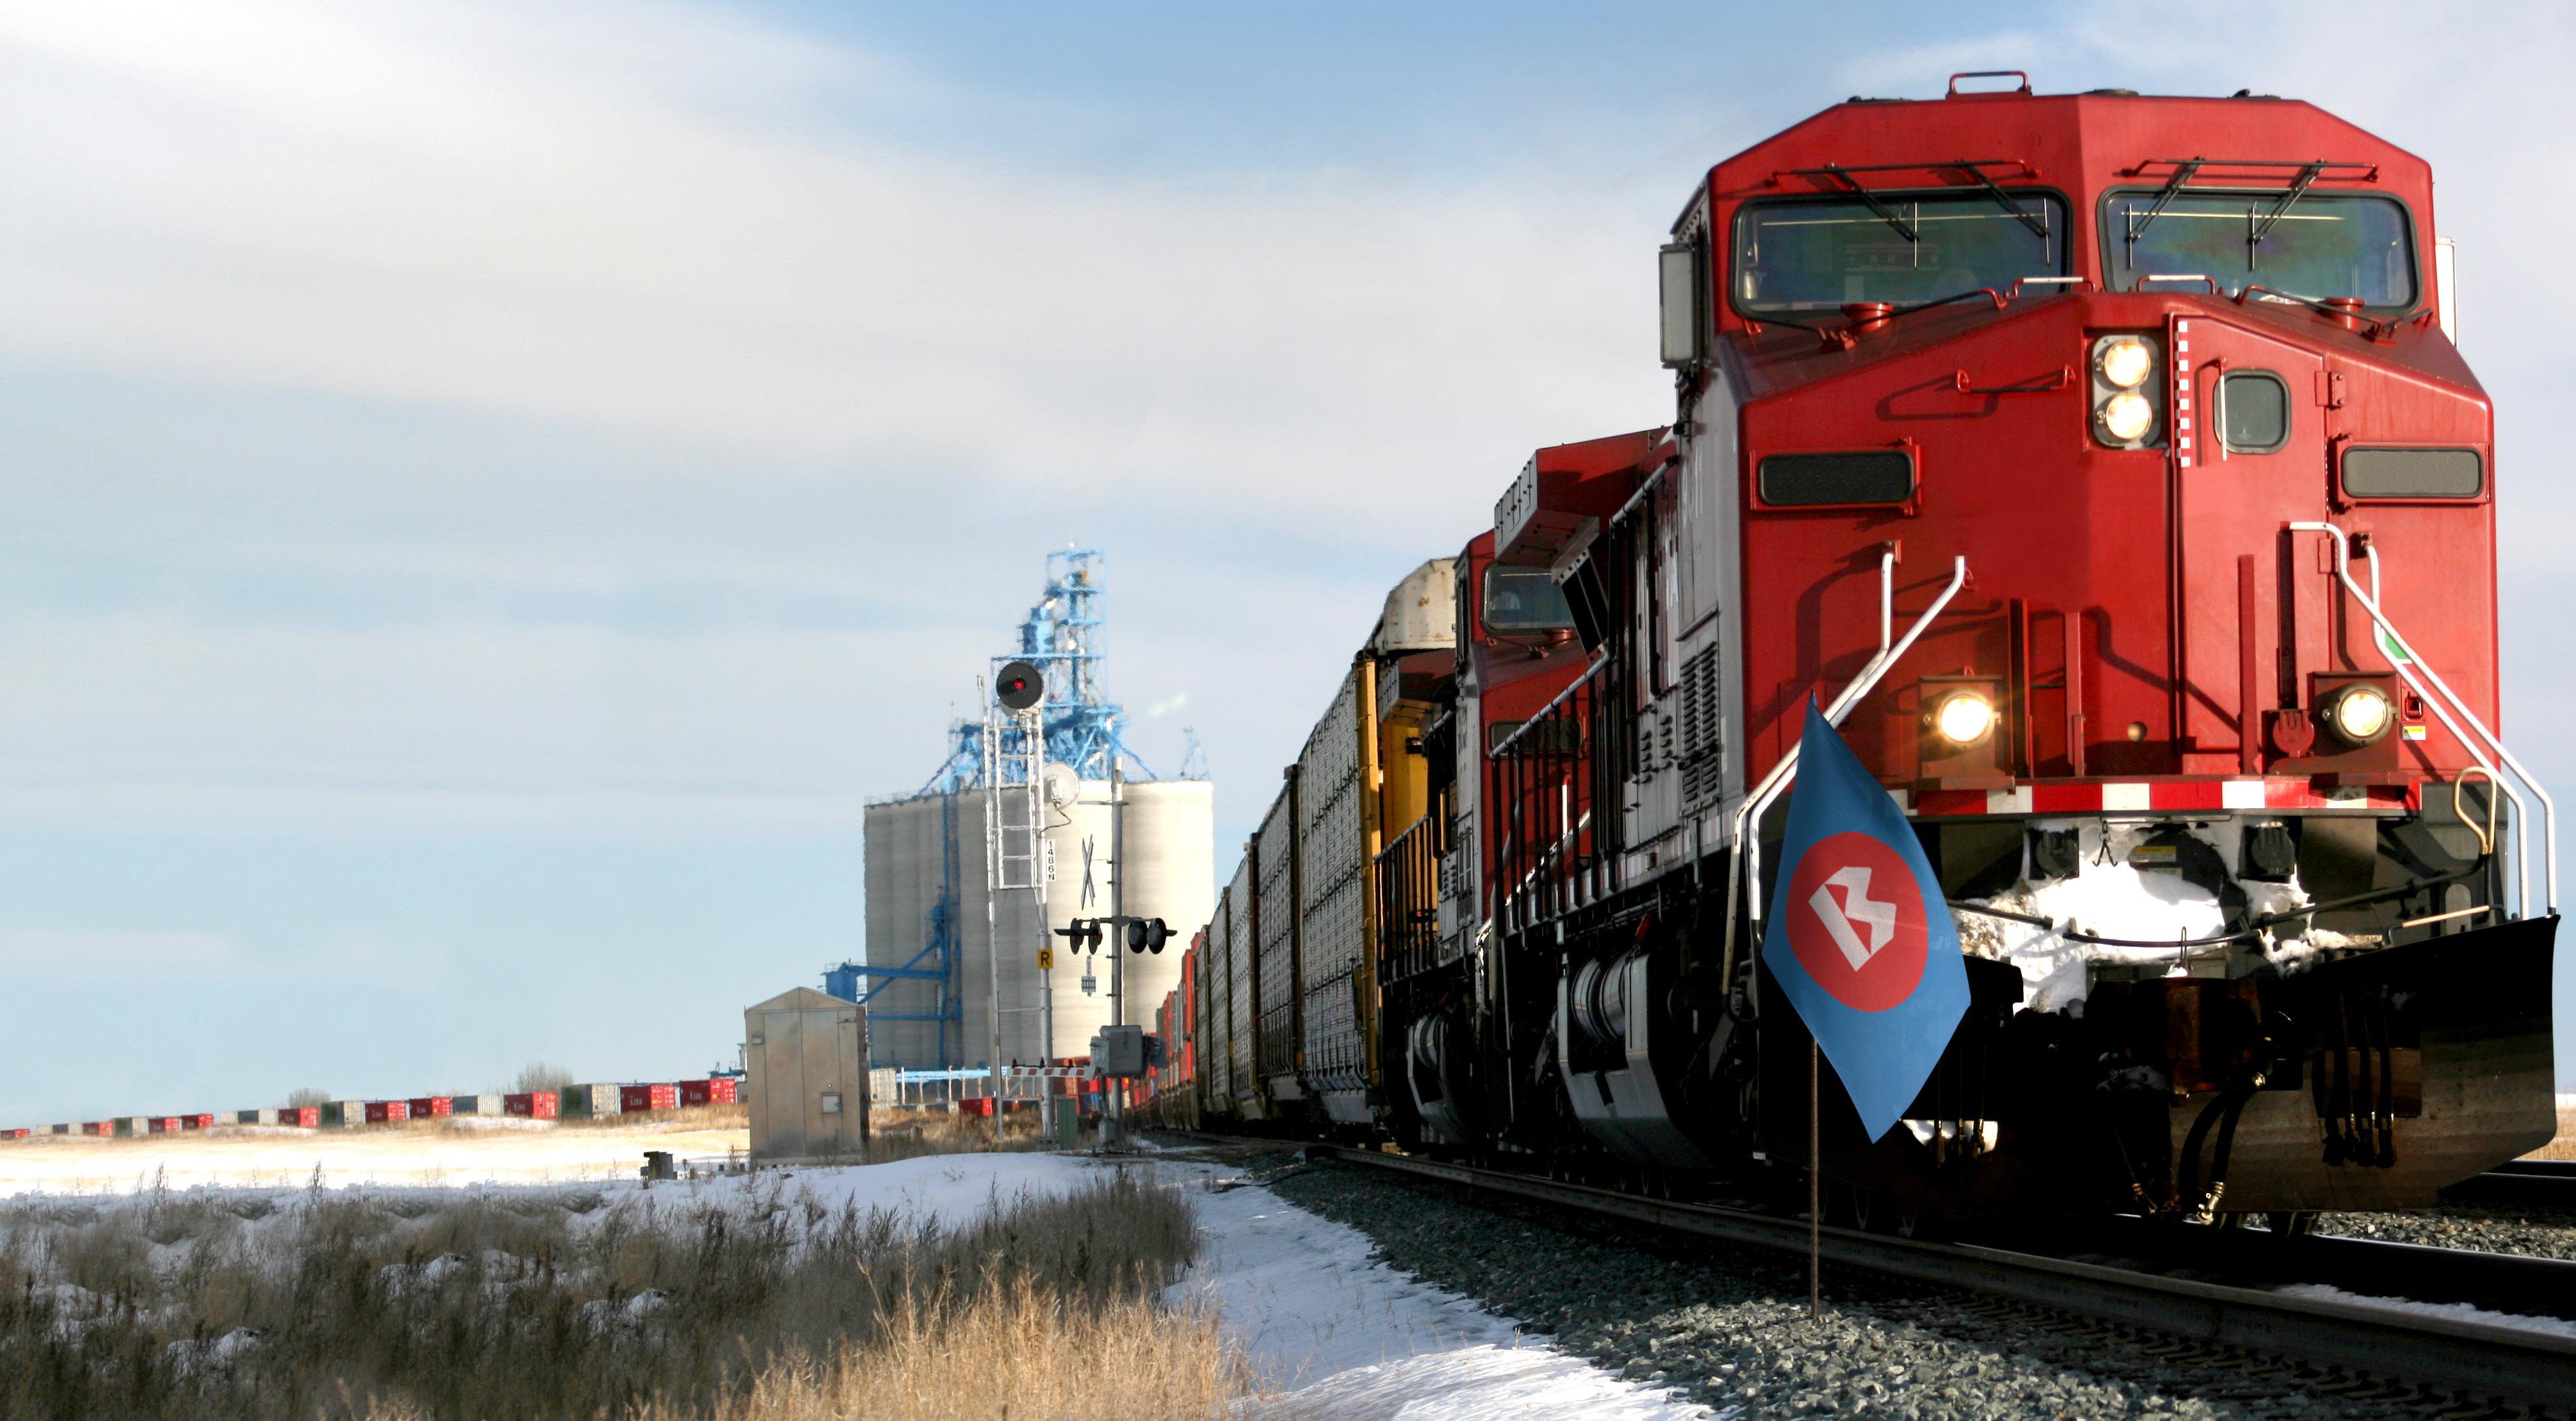 Train bringing goods from Canada to the United States